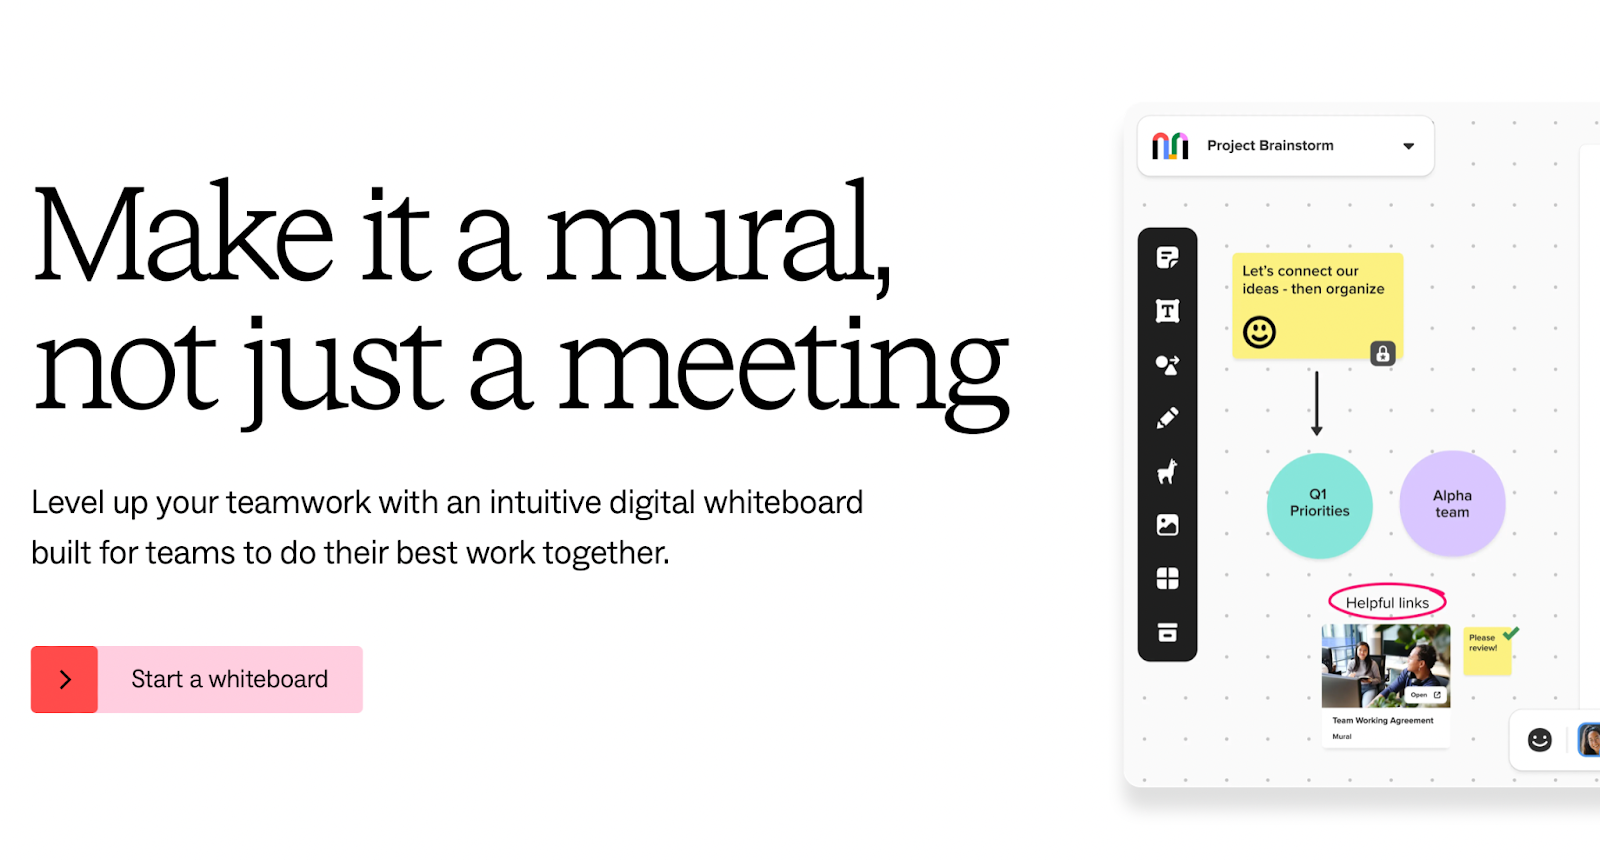 The webpage has the text "Make it a mural, not just a meeting". To the right there is an image of how the product works and underneath the text is a button that says "Start a whiteboard".